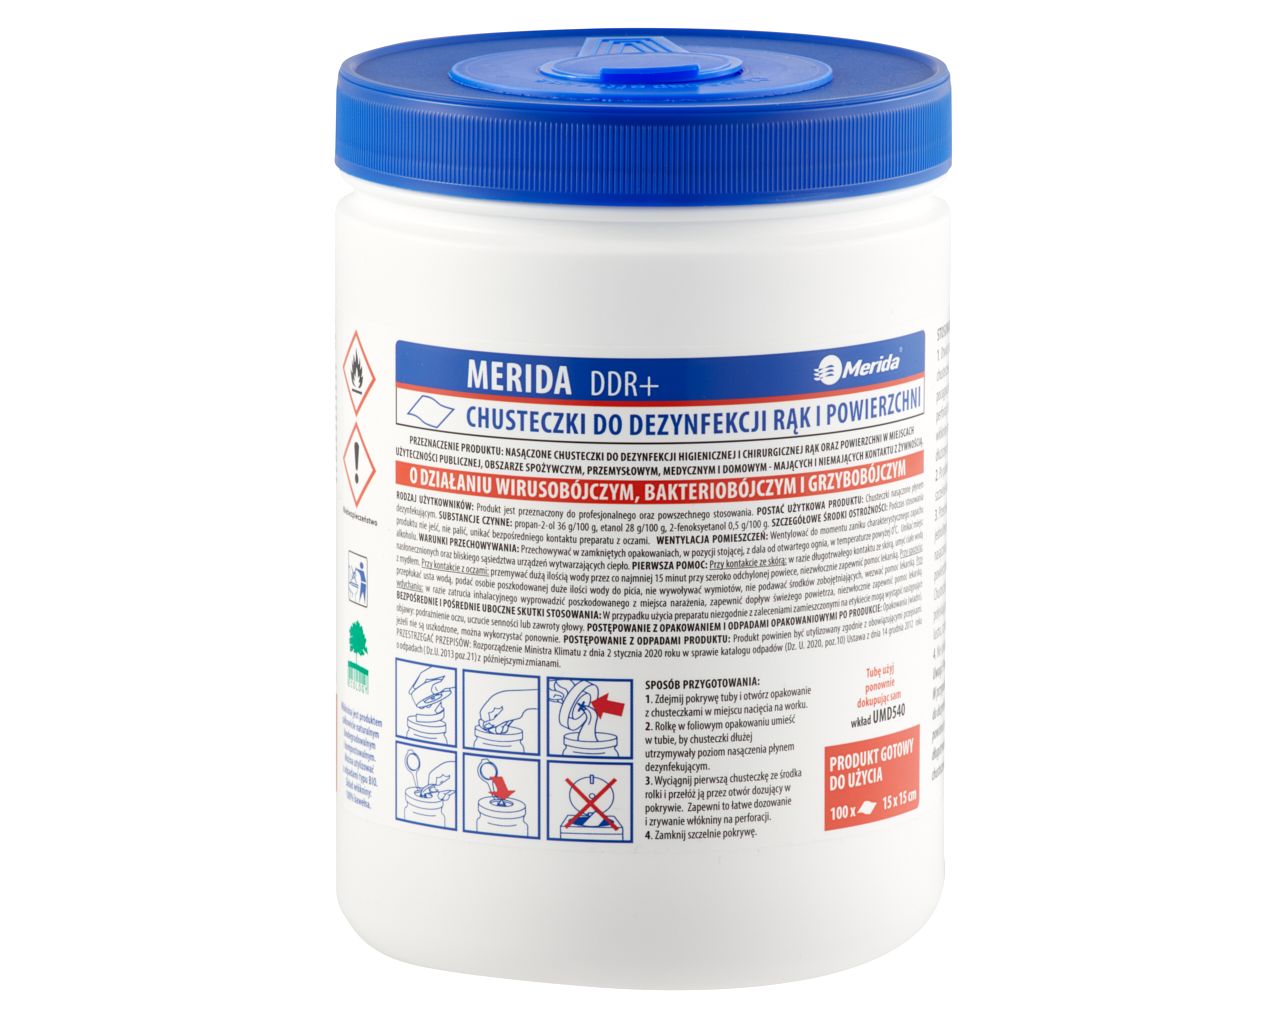 MERIDA DDR+ hand and surface disinfecting wipes, 15 m roll, 100 sheets